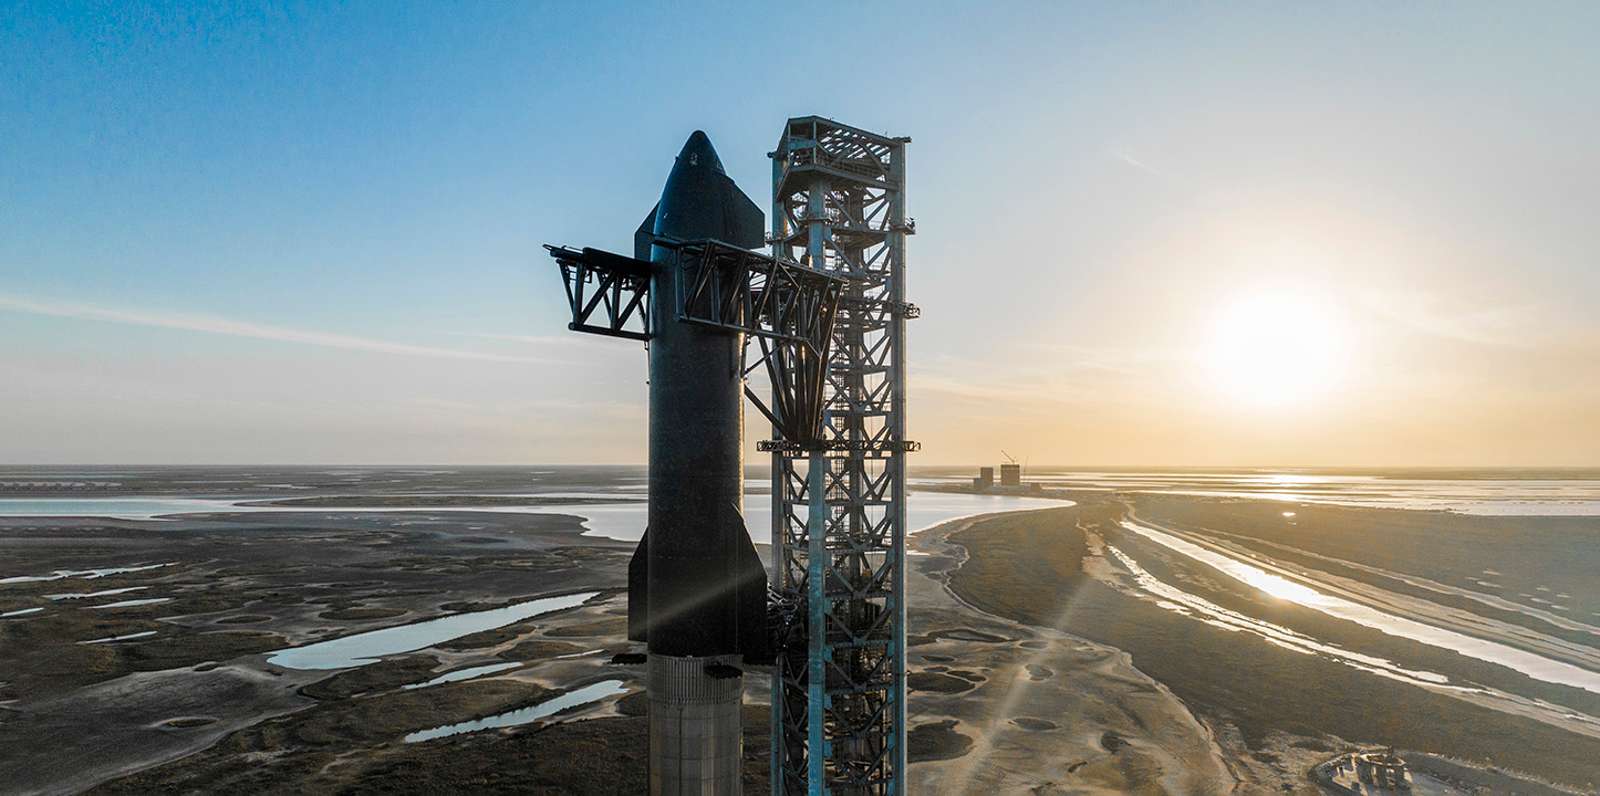 Space X Starship sat on the launch pad.